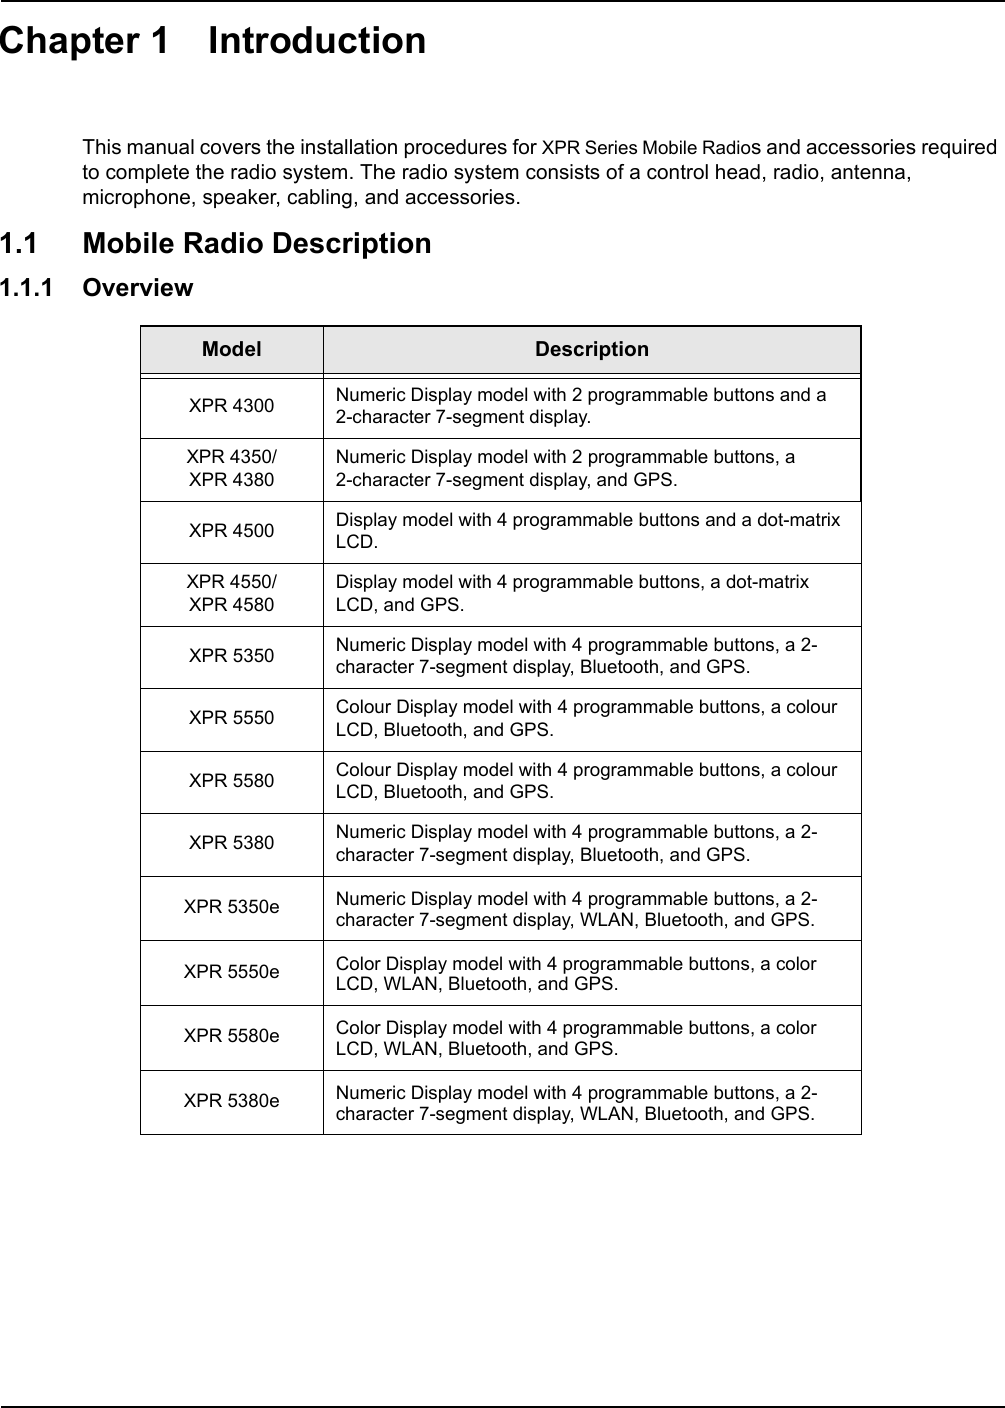 Chapter 1 IntroductionThis manual covers the installation procedures for XPR Series Mobile Radios and accessories required to complete the radio system. The radio system consists of a control head, radio, antenna, microphone, speaker, cabling, and accessories. 1.1 Mobile Radio Description1.1.1 Overview Model DescriptionXPR 4300 Numeric Display model with 2 programmable buttons and a 2-character 7-segment display.XPR 4350/XPR 4380Numeric Display model with 2 programmable buttons, a 2-character 7-segment display, and GPS.XPR 4500 Display model with 4 programmable buttons and a dot-matrix LCD.XPR 4550/XPR 4580Display model with 4 programmable buttons, a dot-matrix LCD, and GPS.XPR 5350 Numeric Display model with 4 programmable buttons, a 2-character 7-segment display, Bluetooth, and GPS.XPR 5550 Colour Display model with 4 programmable buttons, a colour LCD, Bluetooth, and GPS.XPR 5580 Colour Display model with 4 programmable buttons, a colour LCD, Bluetooth, and GPS.XPR 5380 Numeric Display model with 4 programmable buttons, a 2-character 7-segment display, Bluetooth, and GPS.XPR 5350e Numeric Display model with 4 programmable buttons, a 2-character 7-segment display, WLAN, Bluetooth, and GPS.XPR 5550e Color Display model with 4 programmable buttons, a colorLCD, WLAN, Bluetooth, and GPS.XPR 5580e Color Display model with 4 programmable buttons, a colorLCD, WLAN, Bluetooth, and GPS.XPR 5380e Numeric Display model with 4 programmable buttons, a 2-character 7-segment display, WLAN, Bluetooth, and GPS.